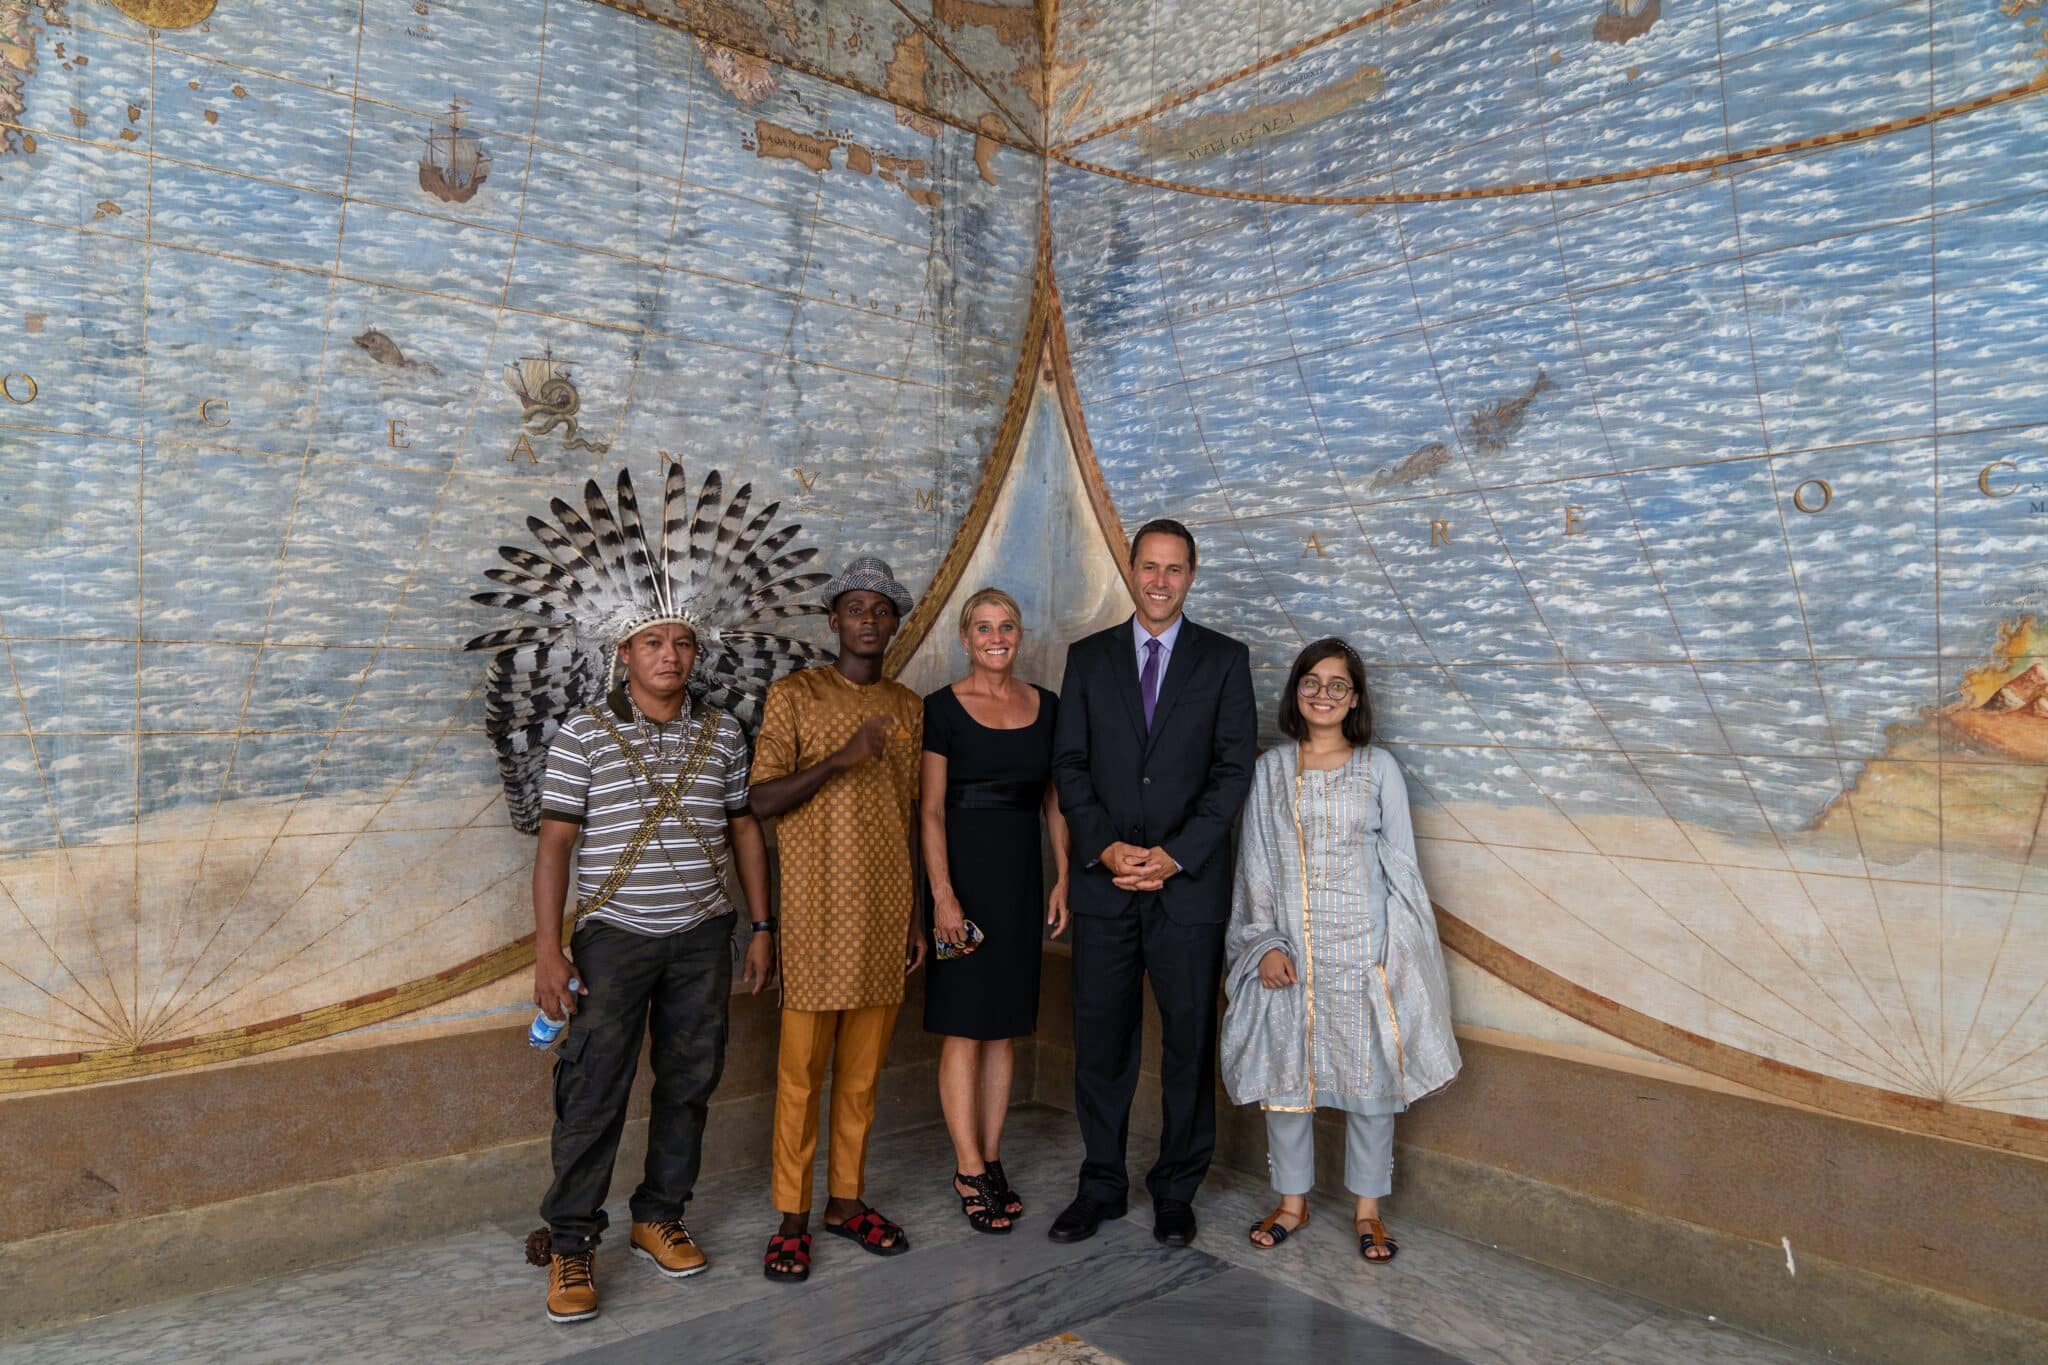 Chief Dadá Borarí from the Maró Indigenous Lands of the Brazilian Amazon; Arouna Kandé, a climate change refugee from Senegal; U.S. scientists Robin Martin and Greg Asner; and teenage climate activist Ridhima Pandey of India participated in the making of the documentary "The Letter." They are seen inside the Apostolic Palace at the Vatican Aug. 26, 2021. The film tells the story of a journey to Rome of frontline leaders to discuss with Pope Francis his encyclical "Laudato Si', on Care for Our Common Home." (CNS photo/courtesy Off the Fence)